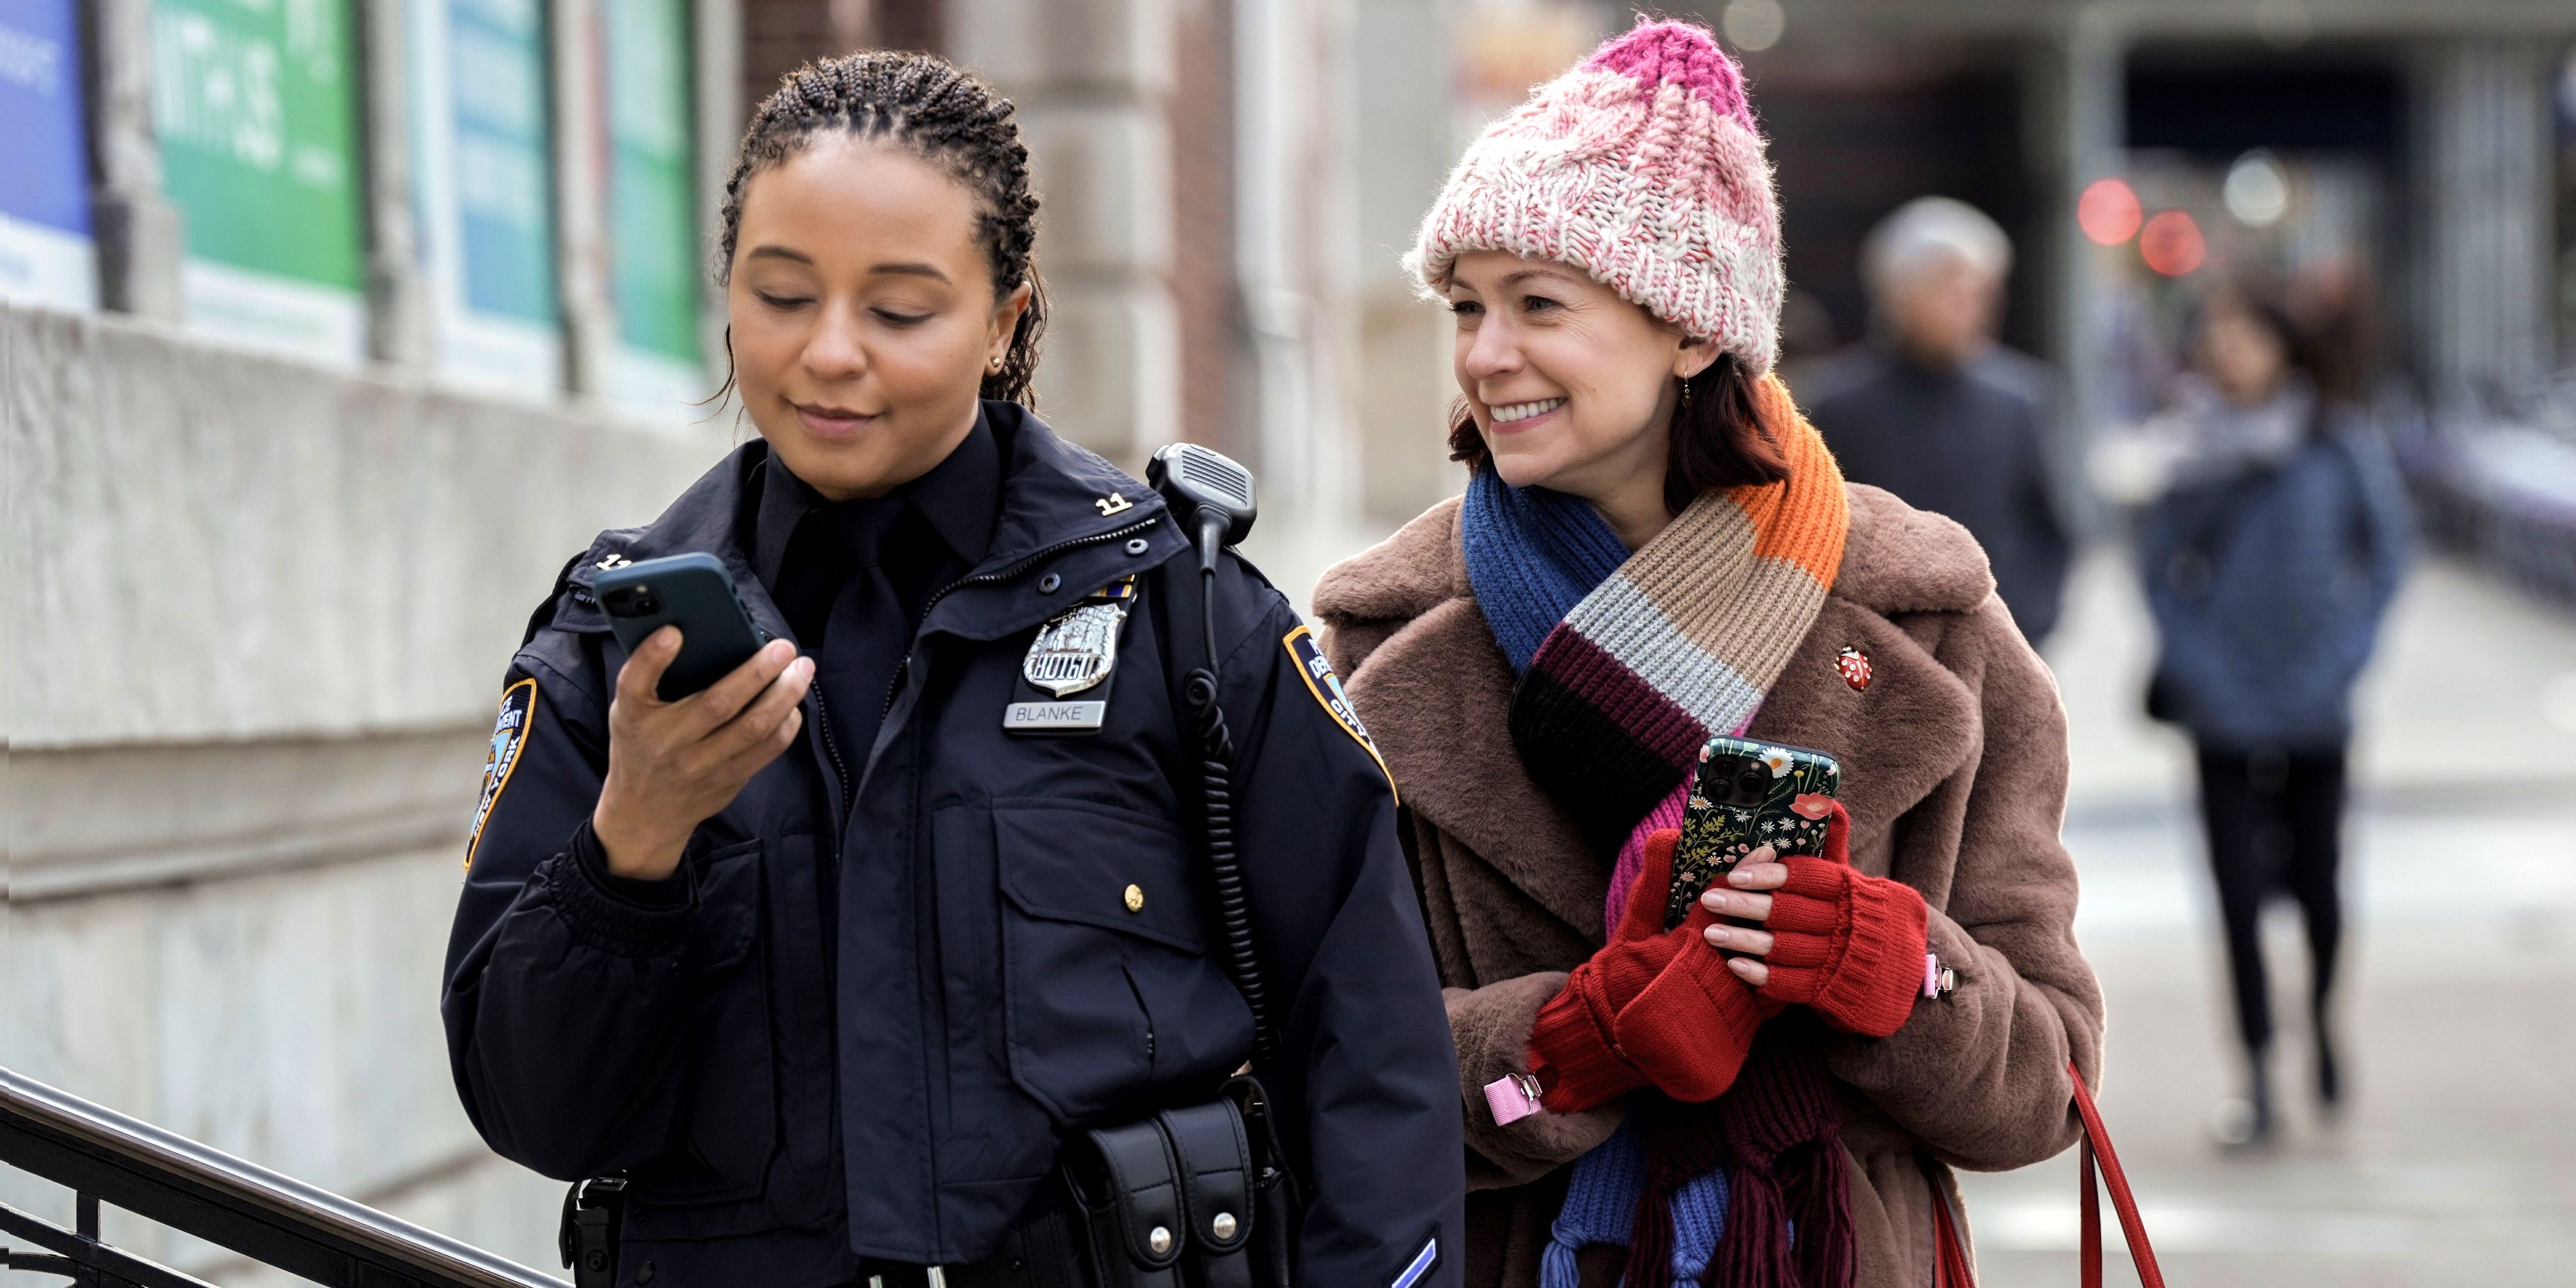 Carrie Preston as Elsbeth holding her phone and smiling at police officer in Elsbeth season 1 episode 6